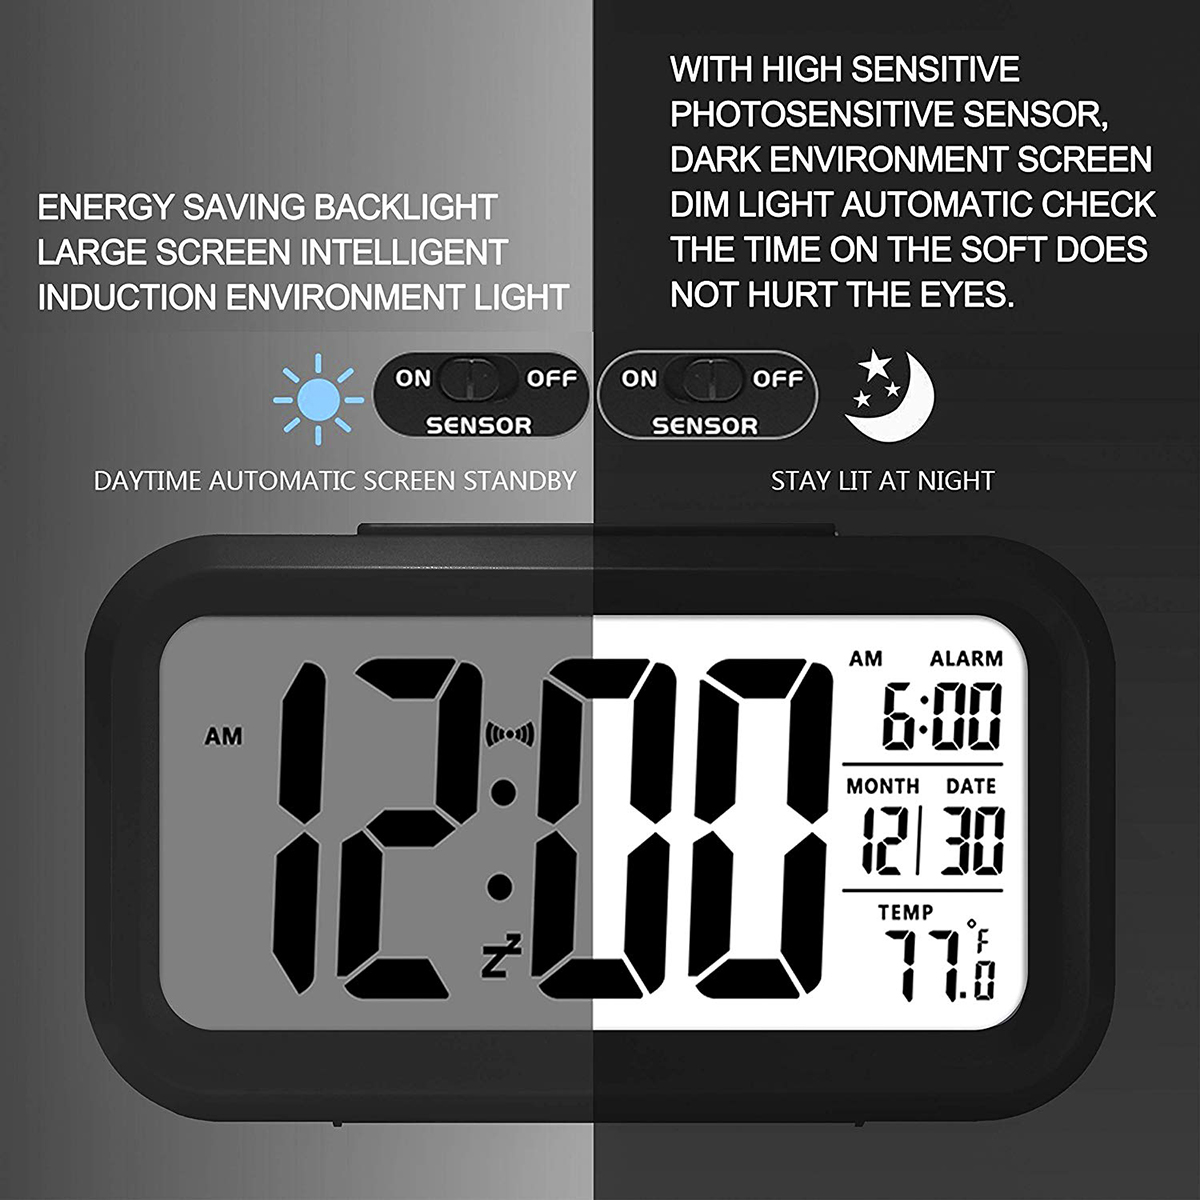 Backlight-LCD-Digital-Alarm-Clock-45quot32quot-Large-Display-Night-Light-with-Calendar-Thermometer-E-1760102-2